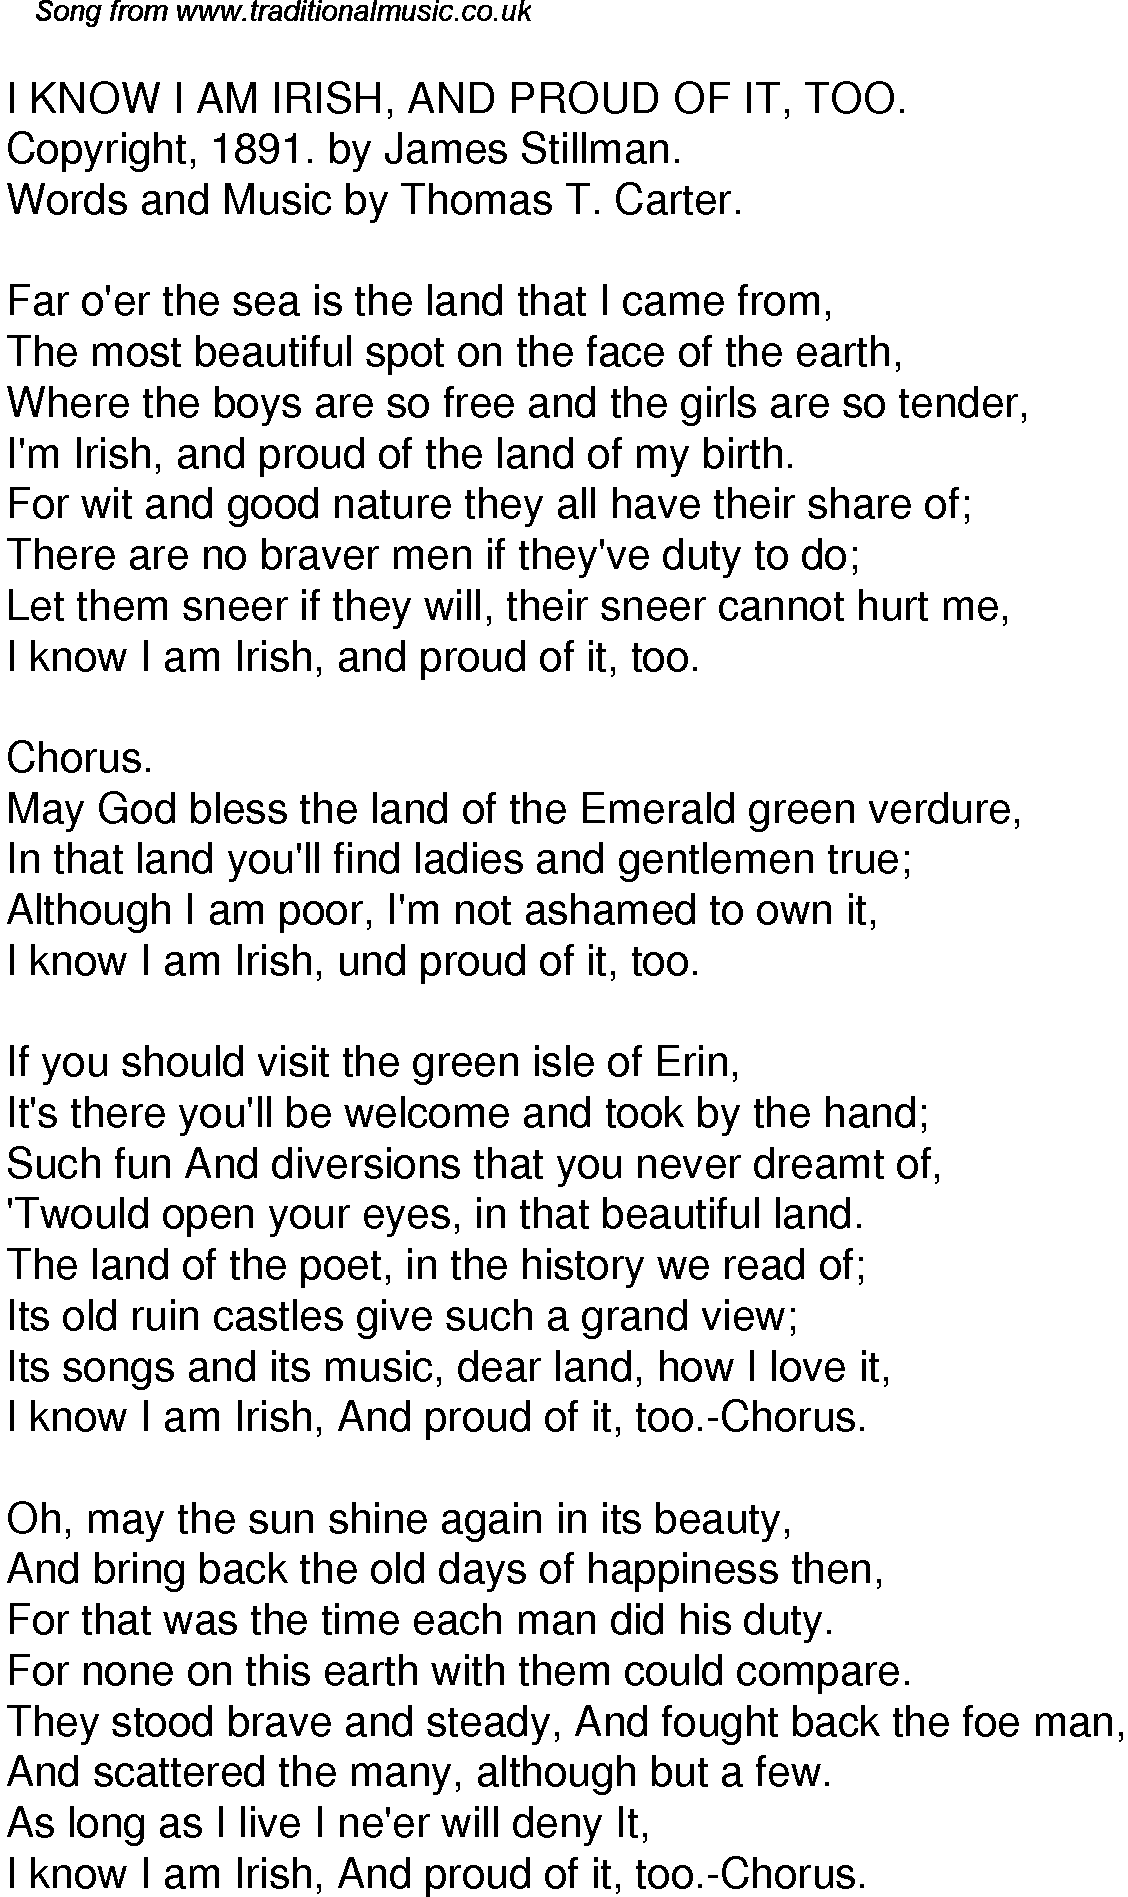 Old Time Song Lyrics for 34 I Know I Am Irish And Proud Of It Too